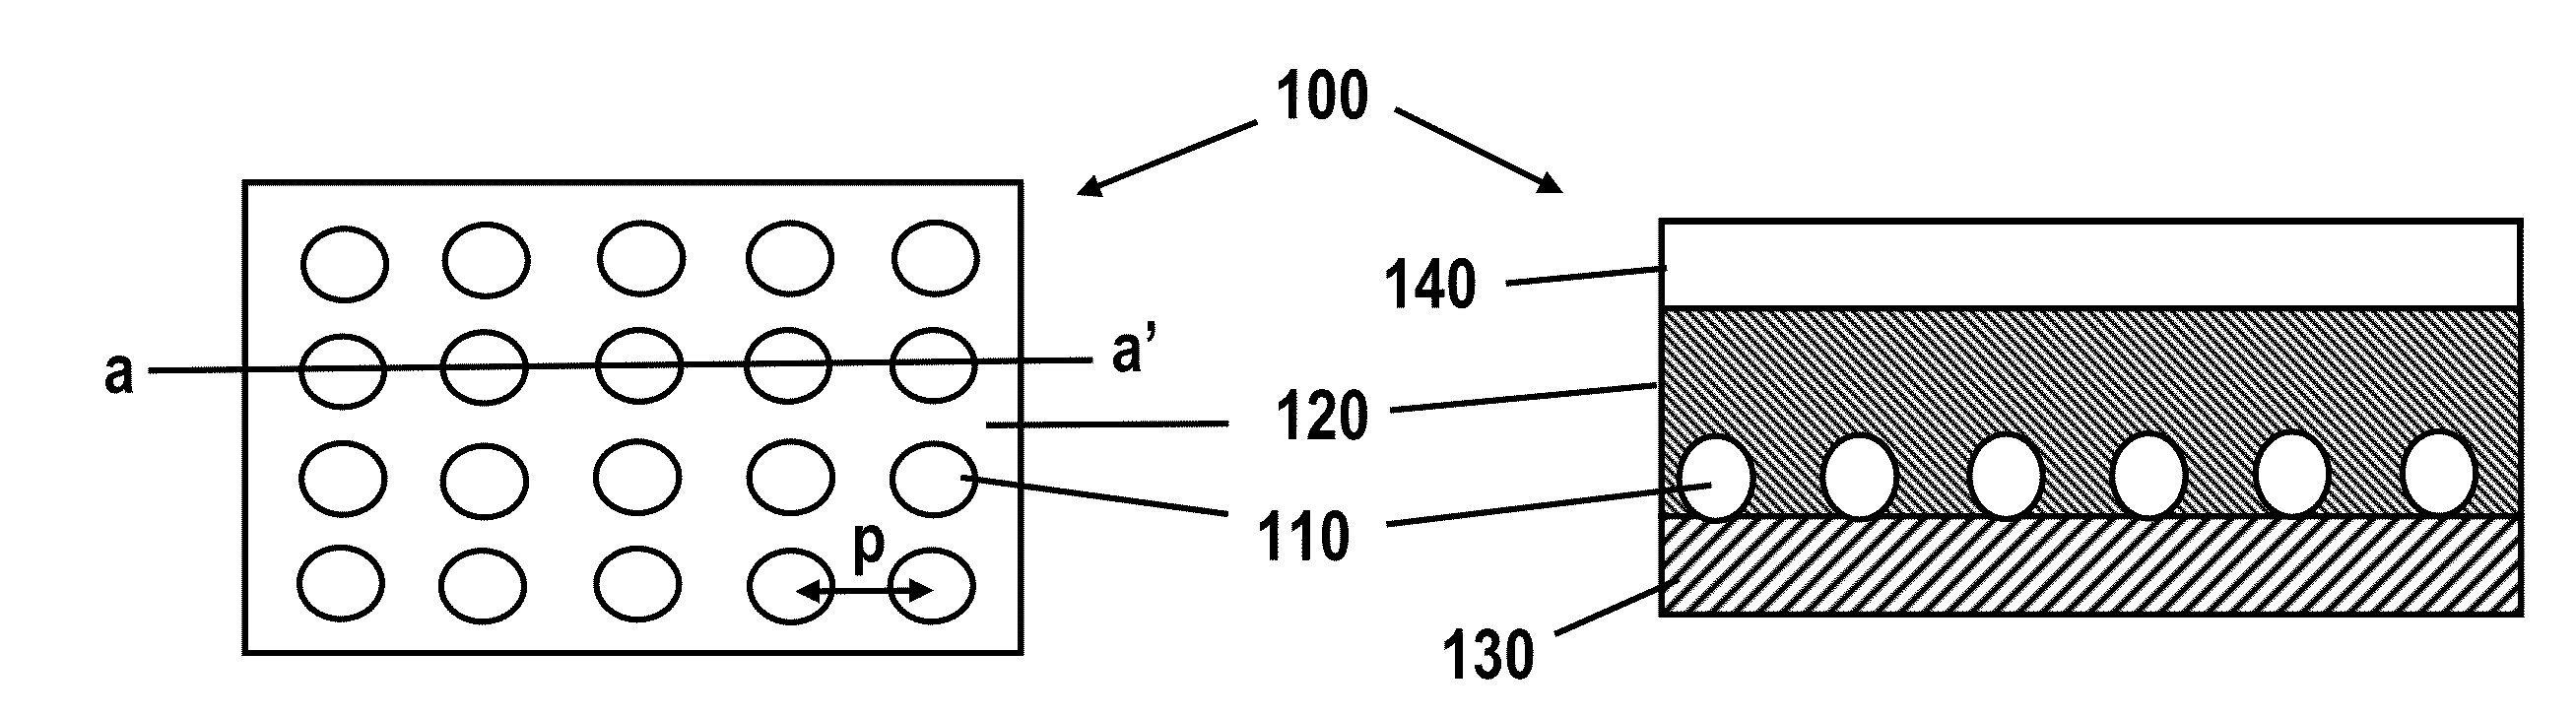 Non-random array anisotropic conductive film (ACF) and manufacturing processes